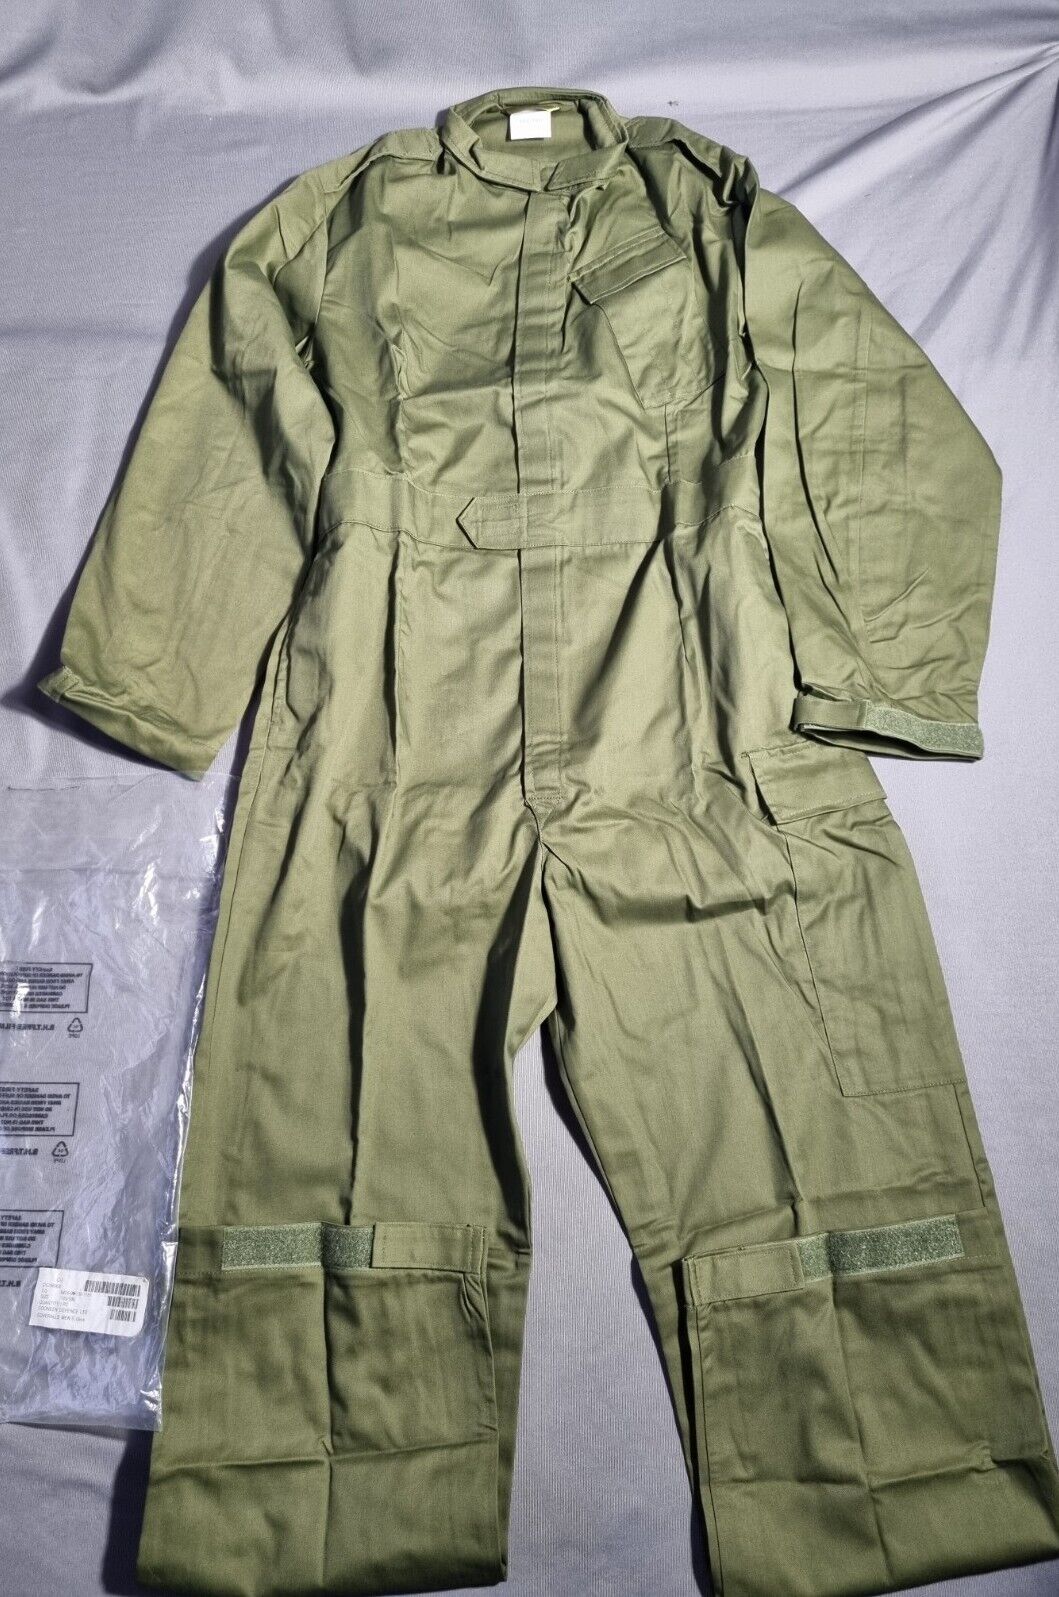 Genuine British Army RAF Aircrew Overalls Olive Green Coveralls Boiler Suit